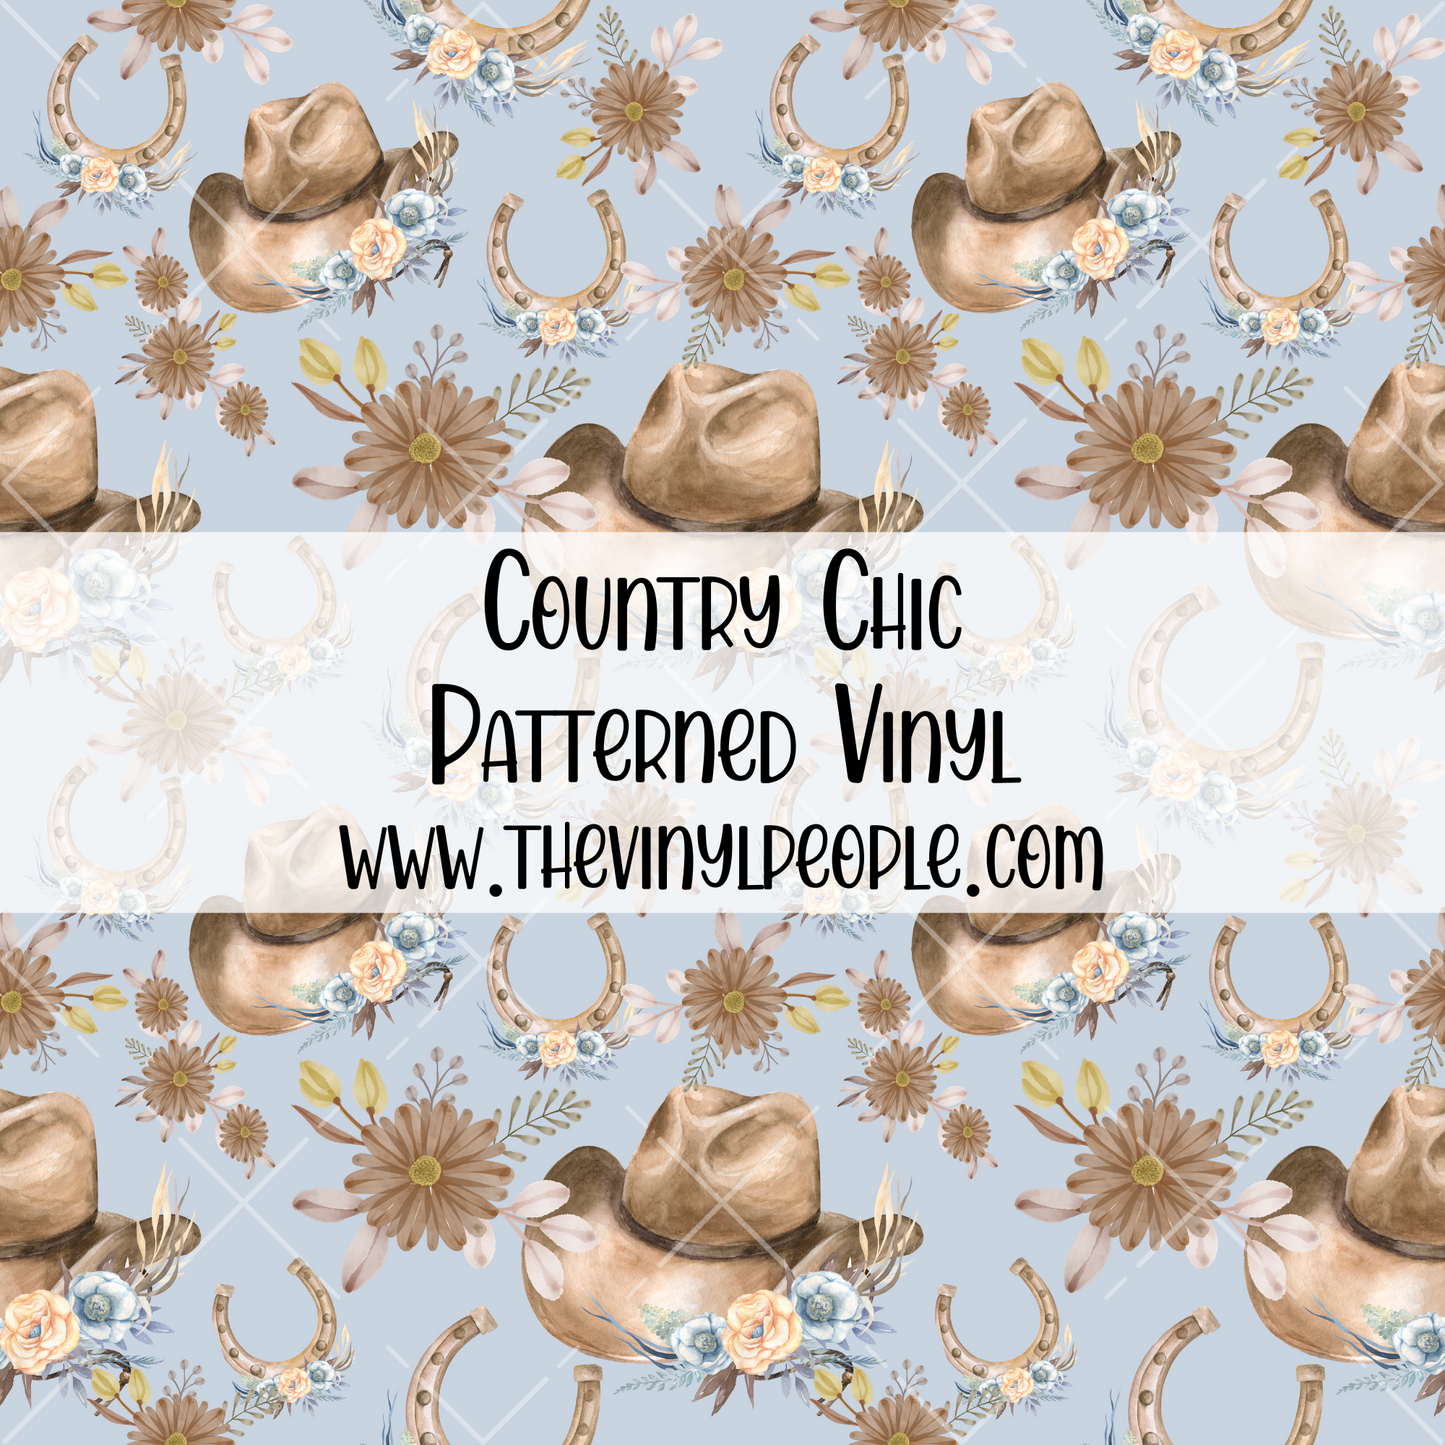 Country Chic Patterned Vinyl